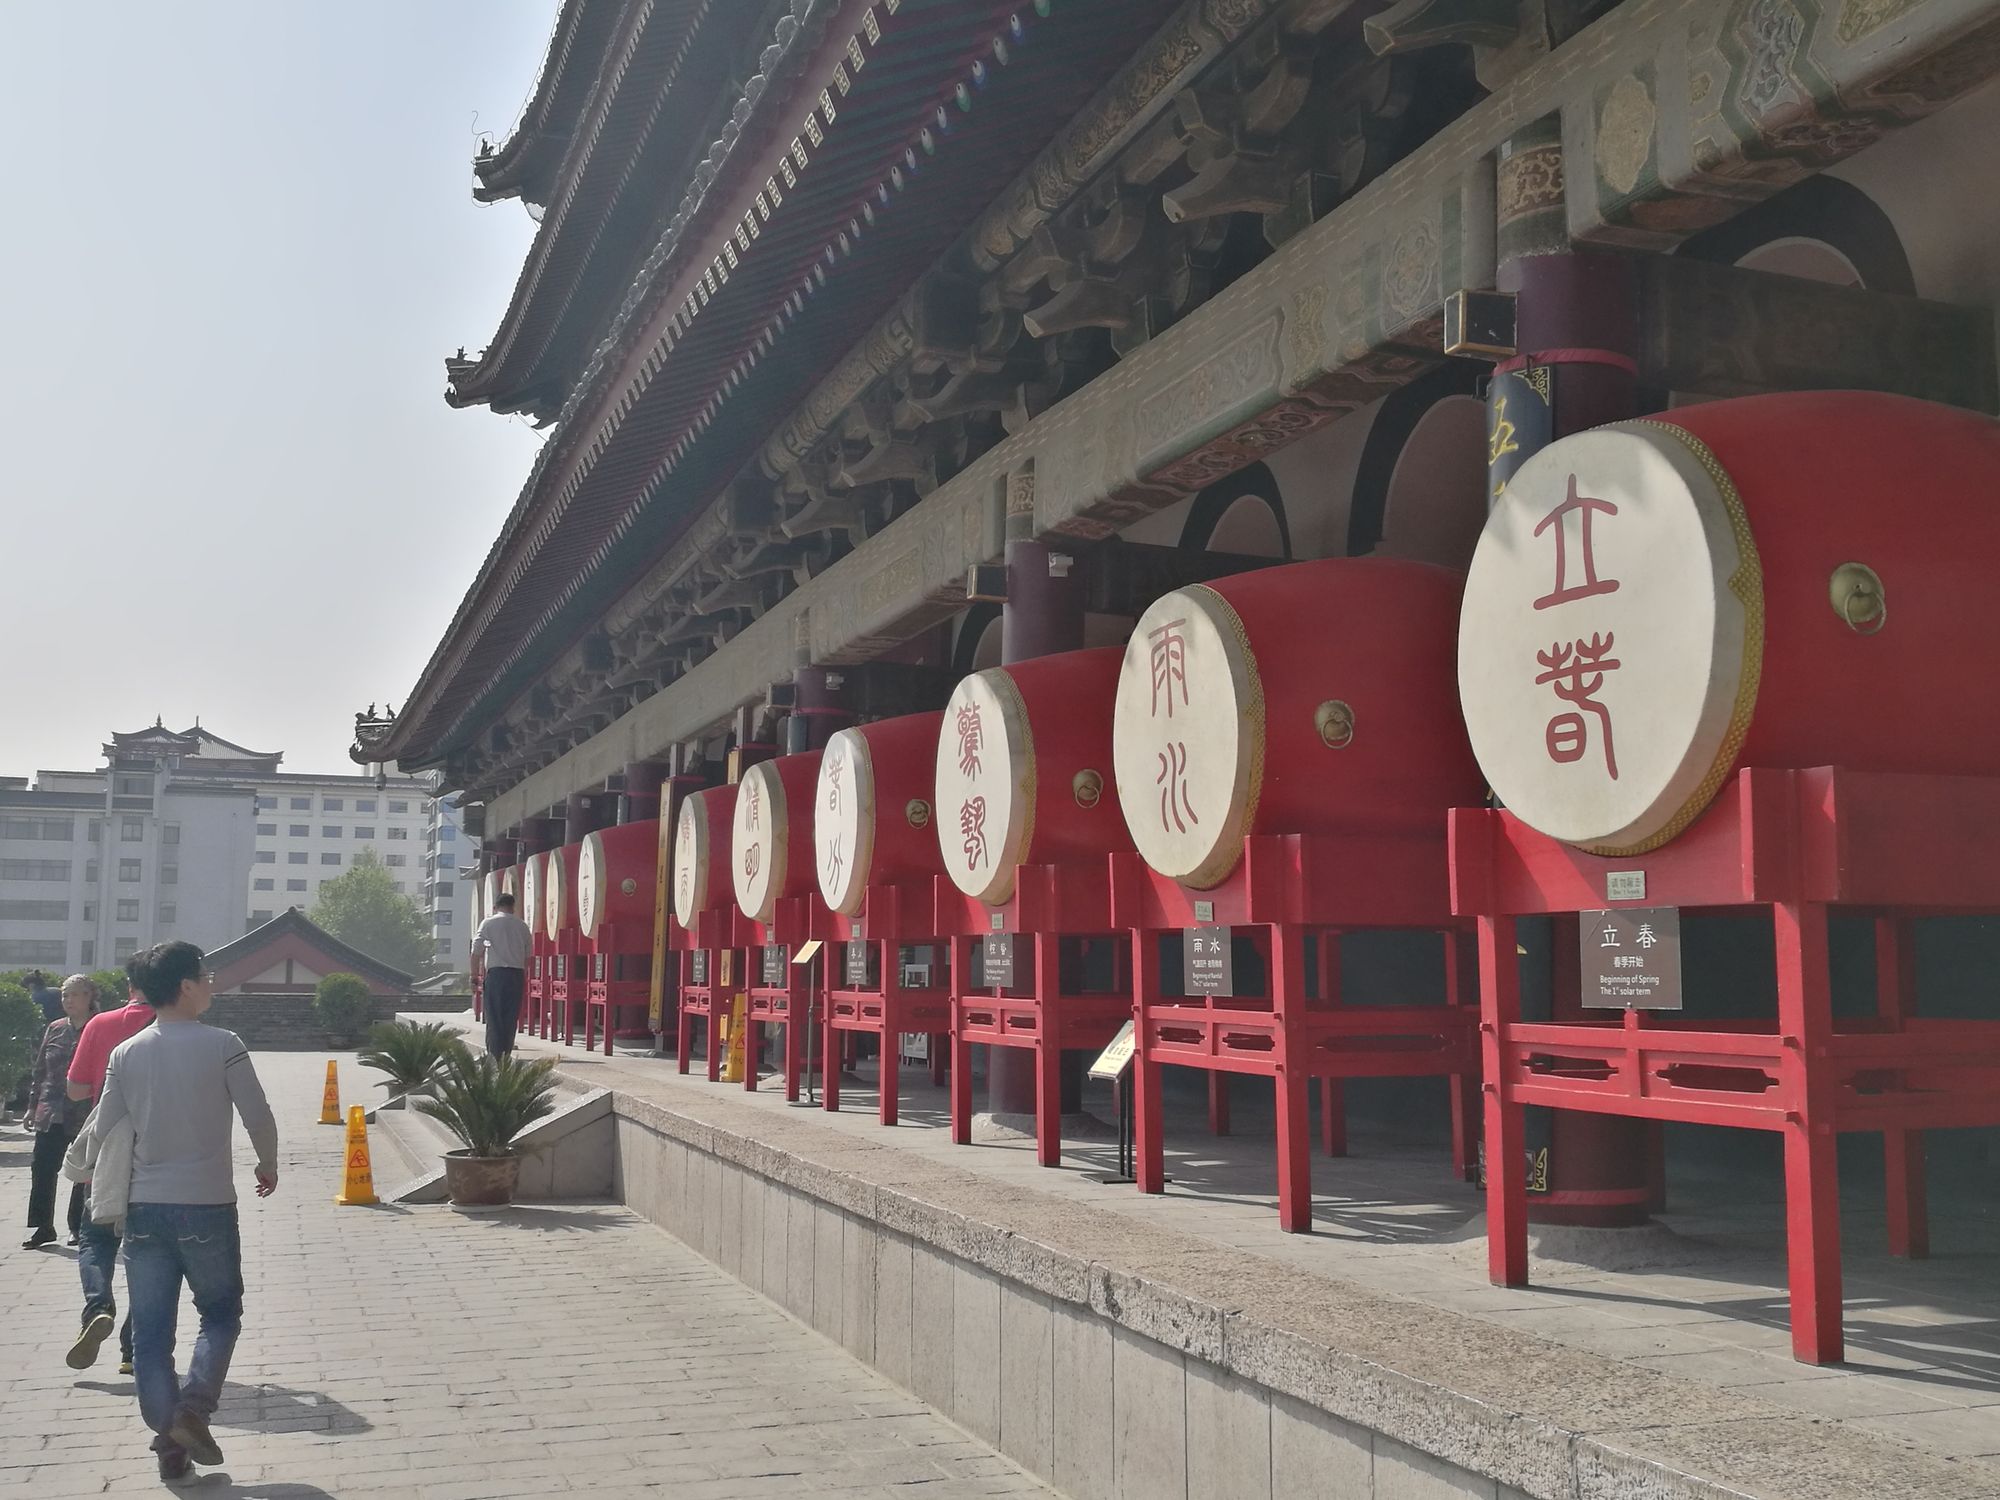 My first time in China – Xi’an 2019